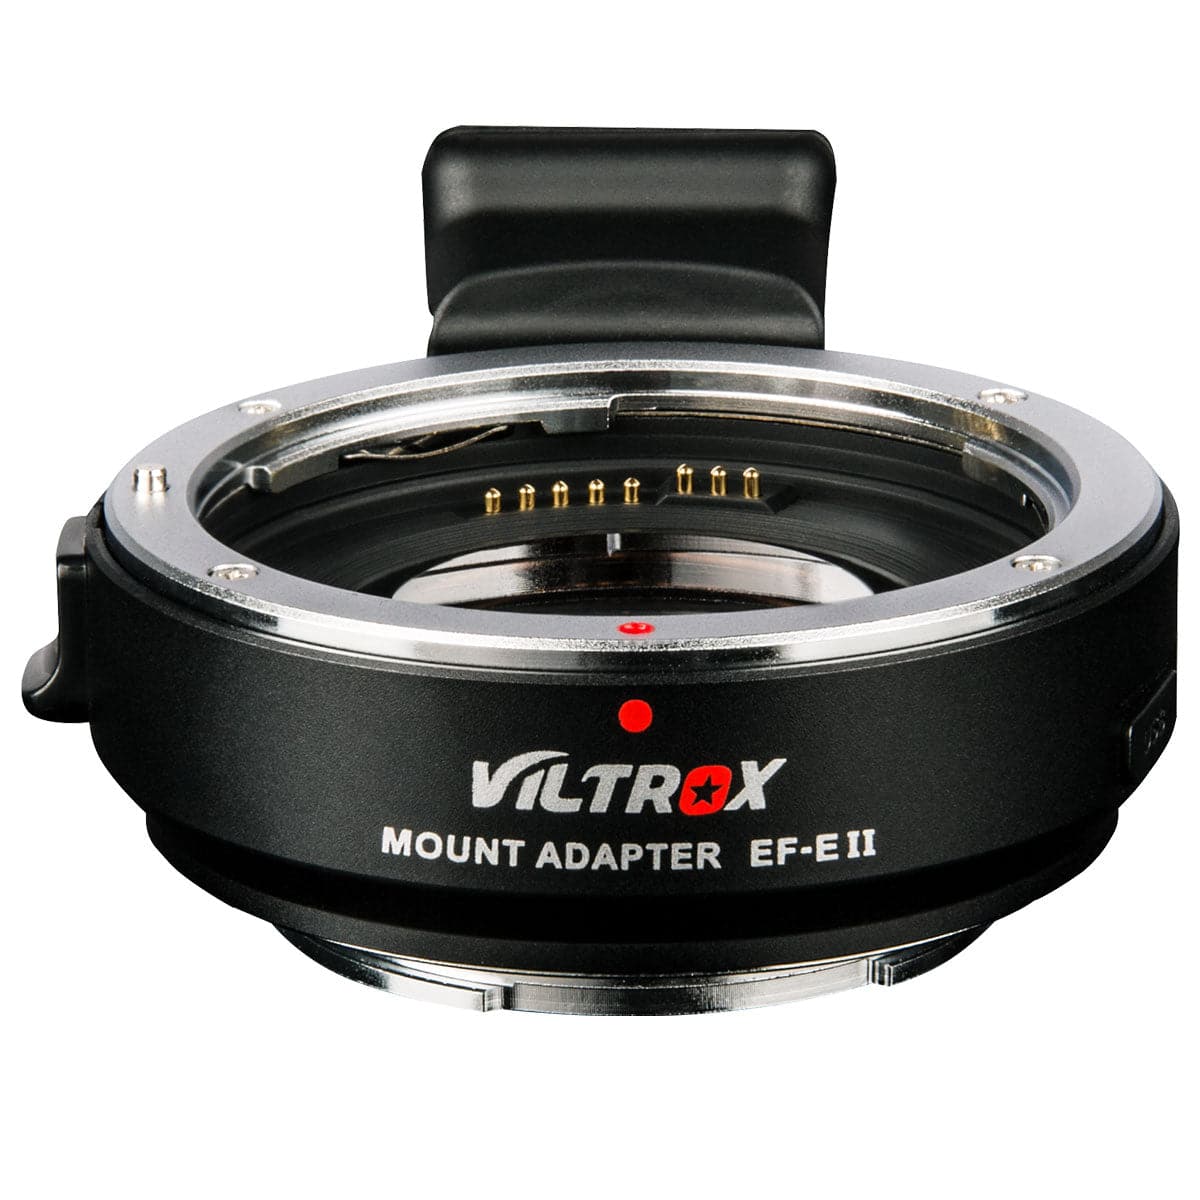 VILTROX EF-E II Auto Focus Booster Lens Adapter for Canon EF Lens to S